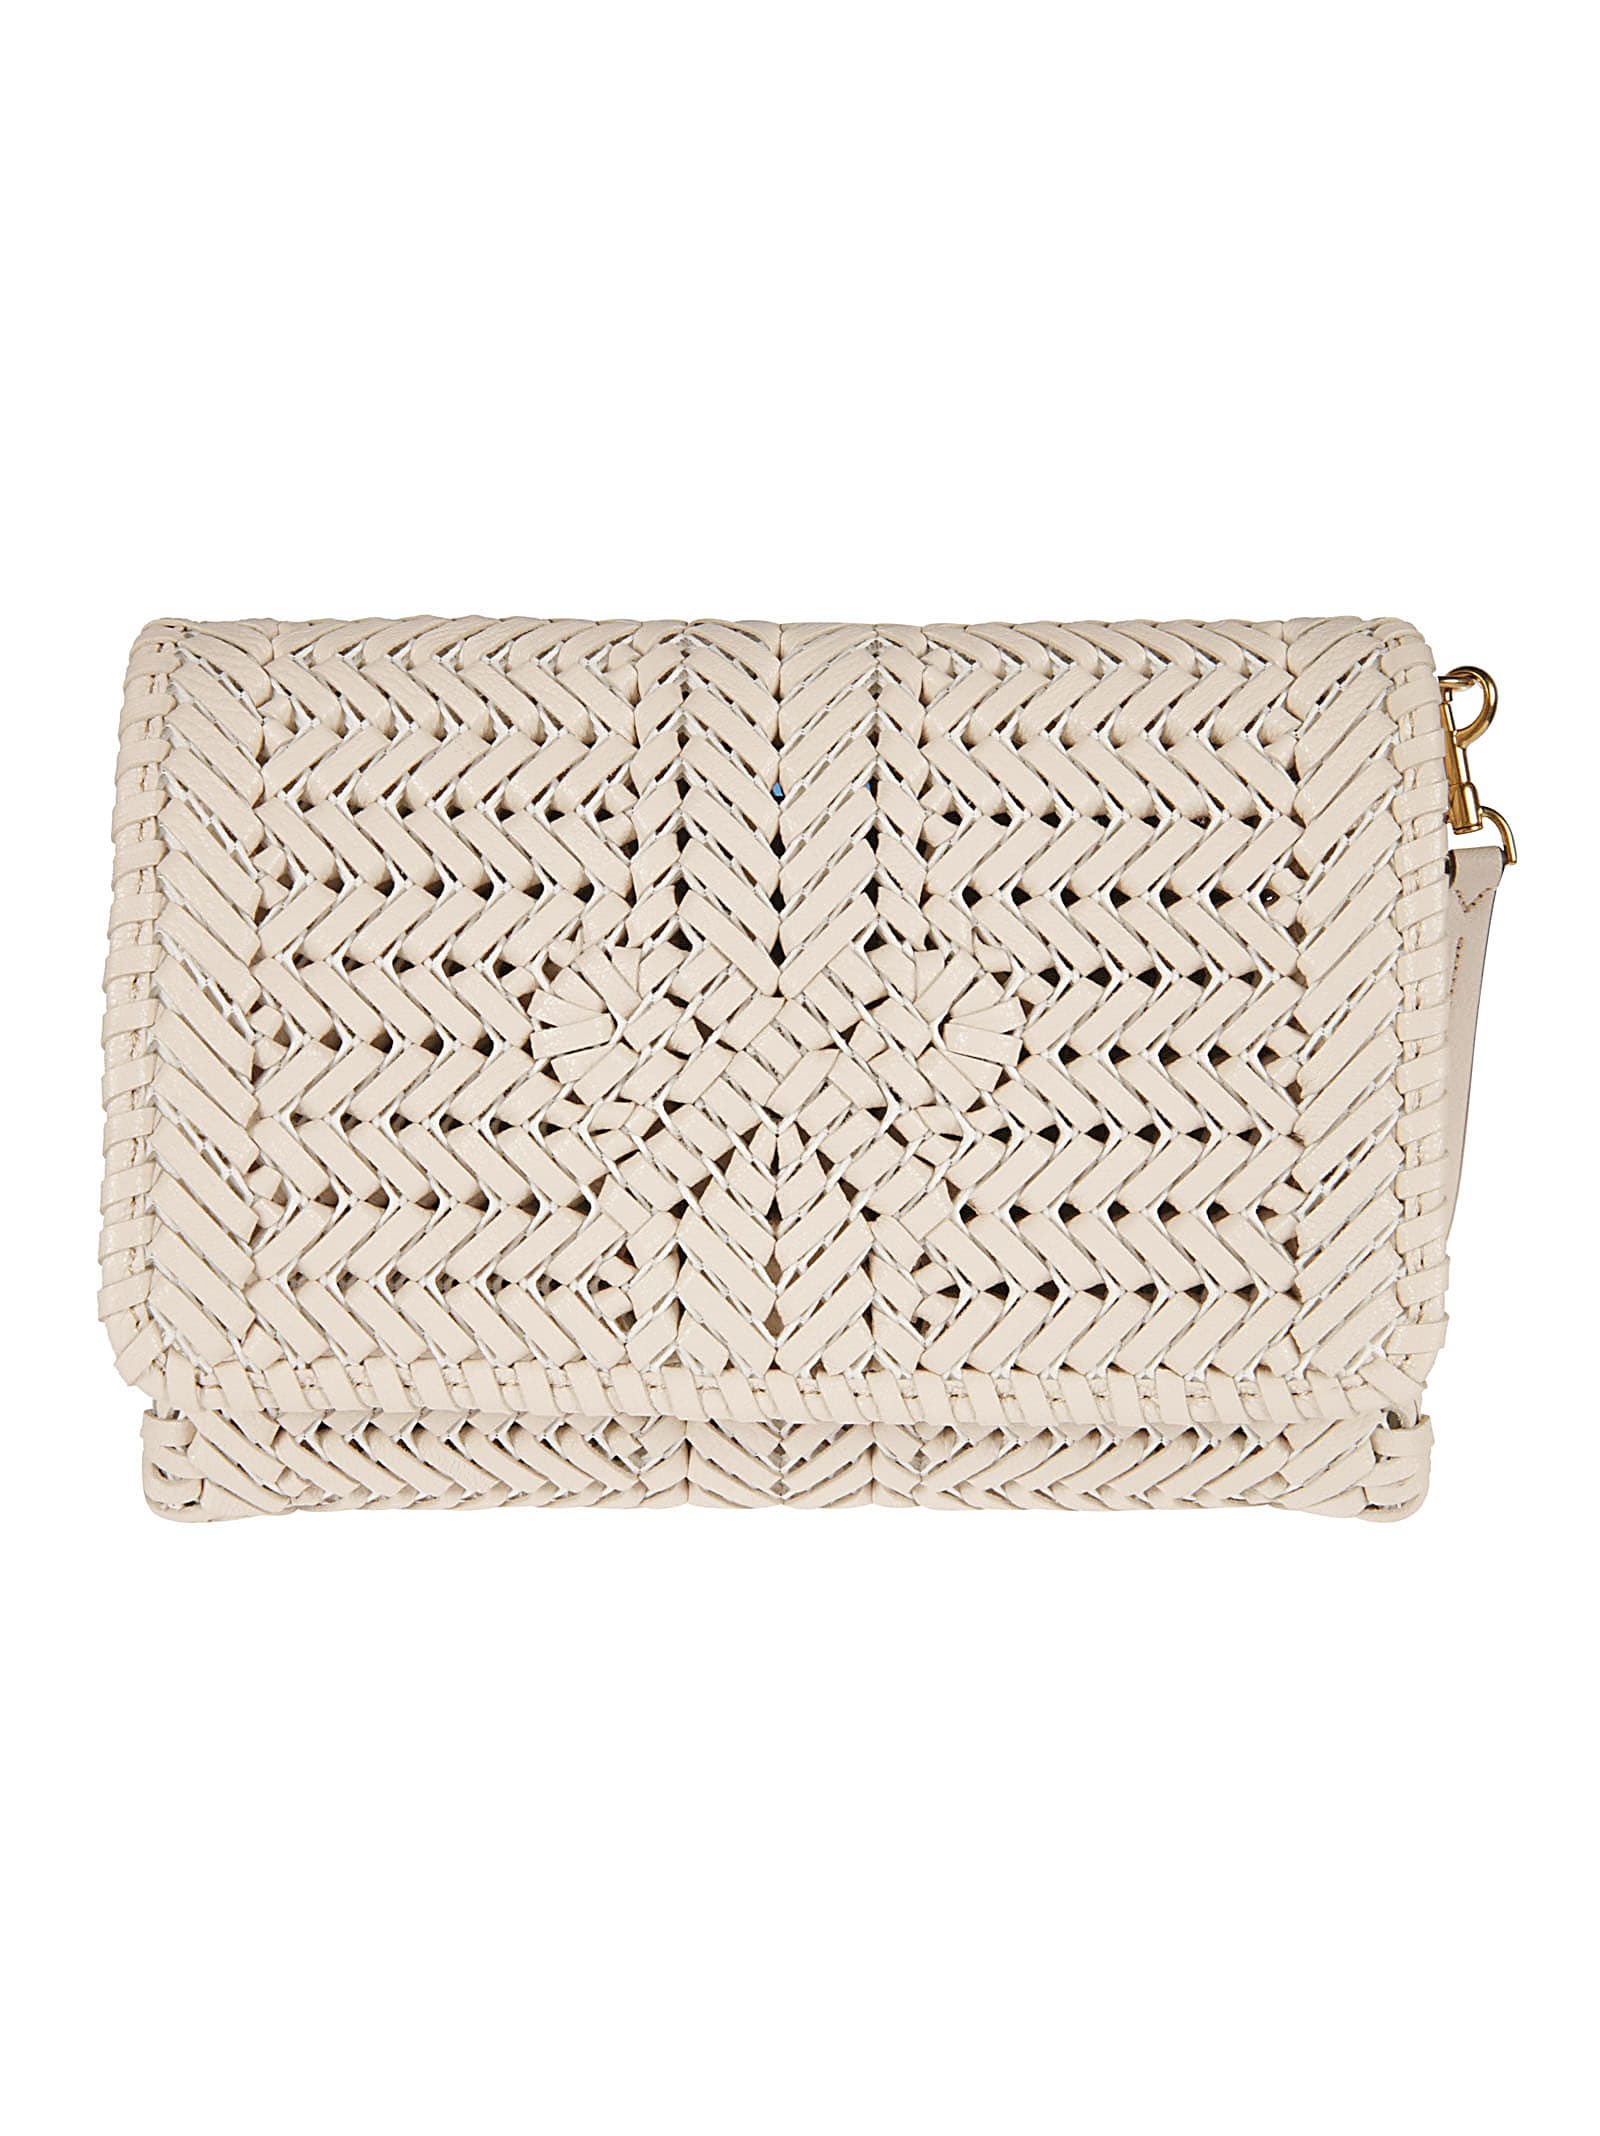 Anya Hindmarch Patterned Woven Pouch